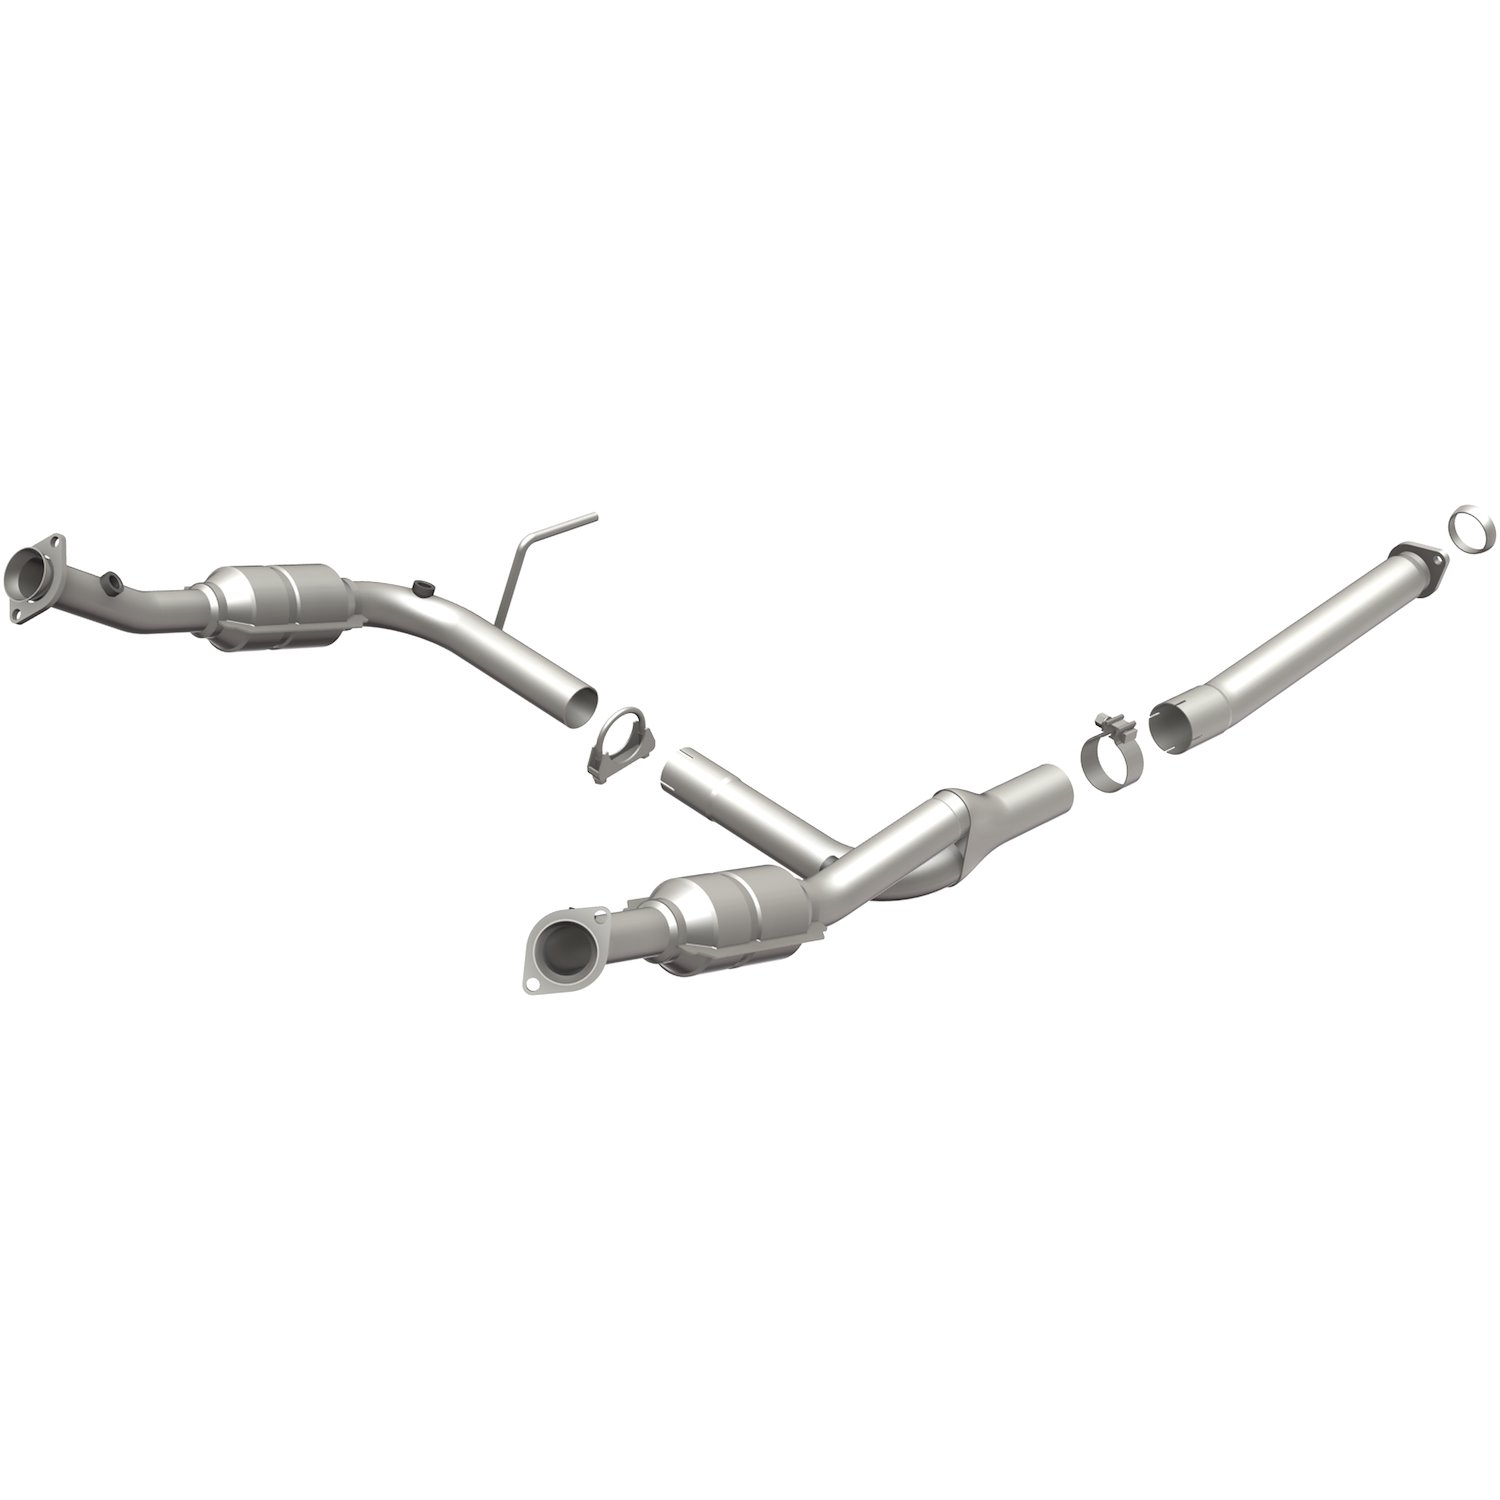 HM Grade Federal / EPA Compliant Direct-Fit Catalytic Converter 93111